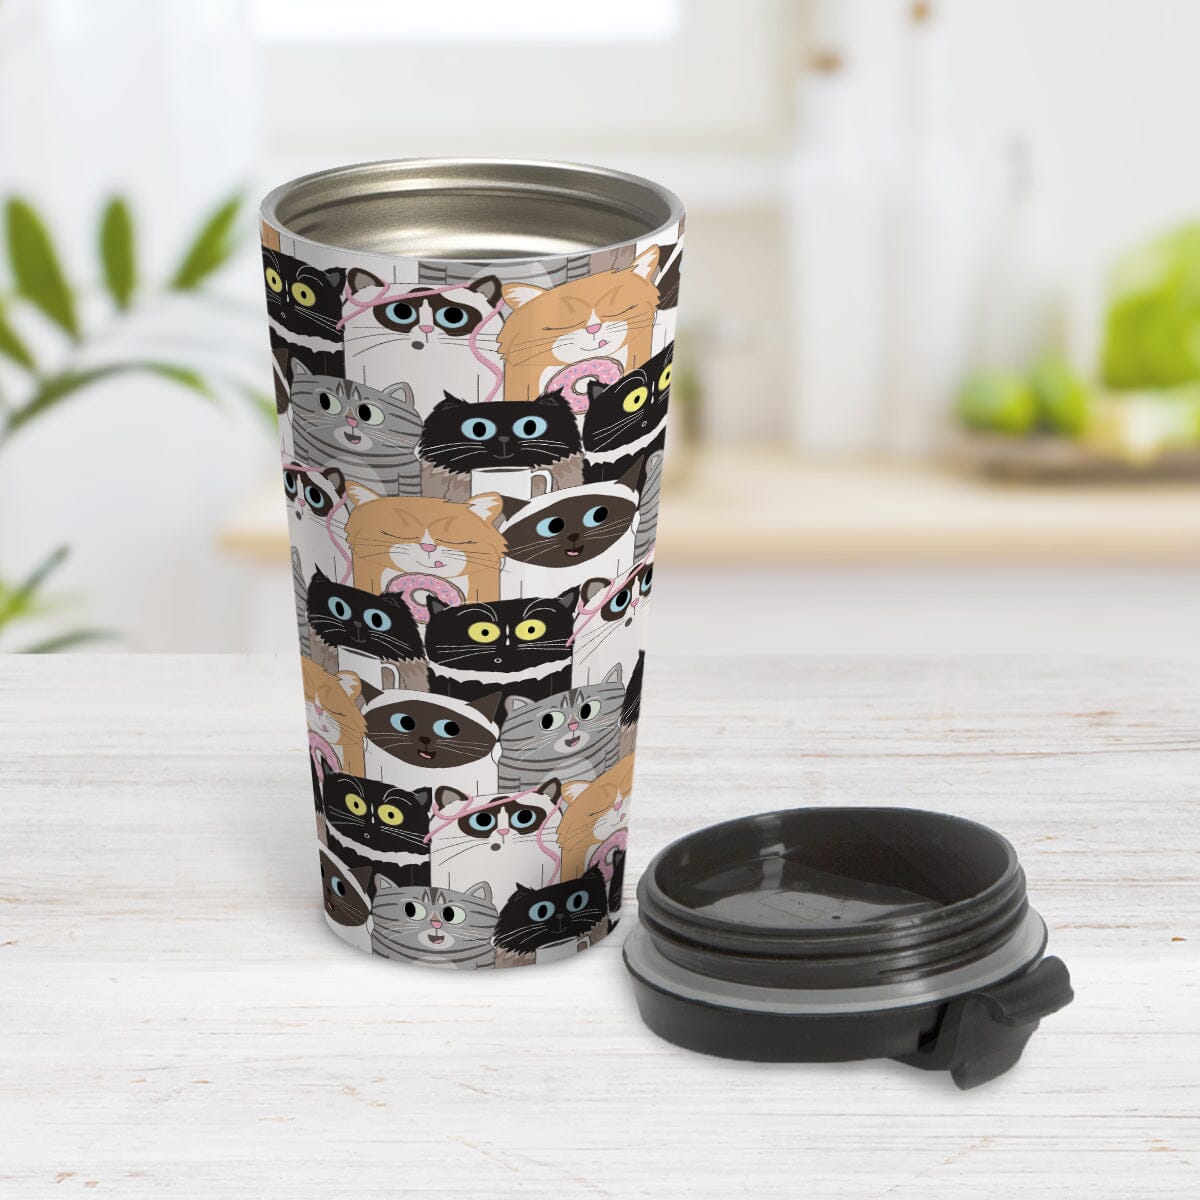 Cute Cat Stack Pattern Travel Mug (15oz) at Amy's Coffee Mugs. A cute stainless steel travel mug with an illustrated pattern of different breeds of cats with different fun expressions, with yarn, coffee, and donuts. This stacked pattern of cats wraps around the cup. Photo shows the travel mug open on a table with the lid laying beside it. 